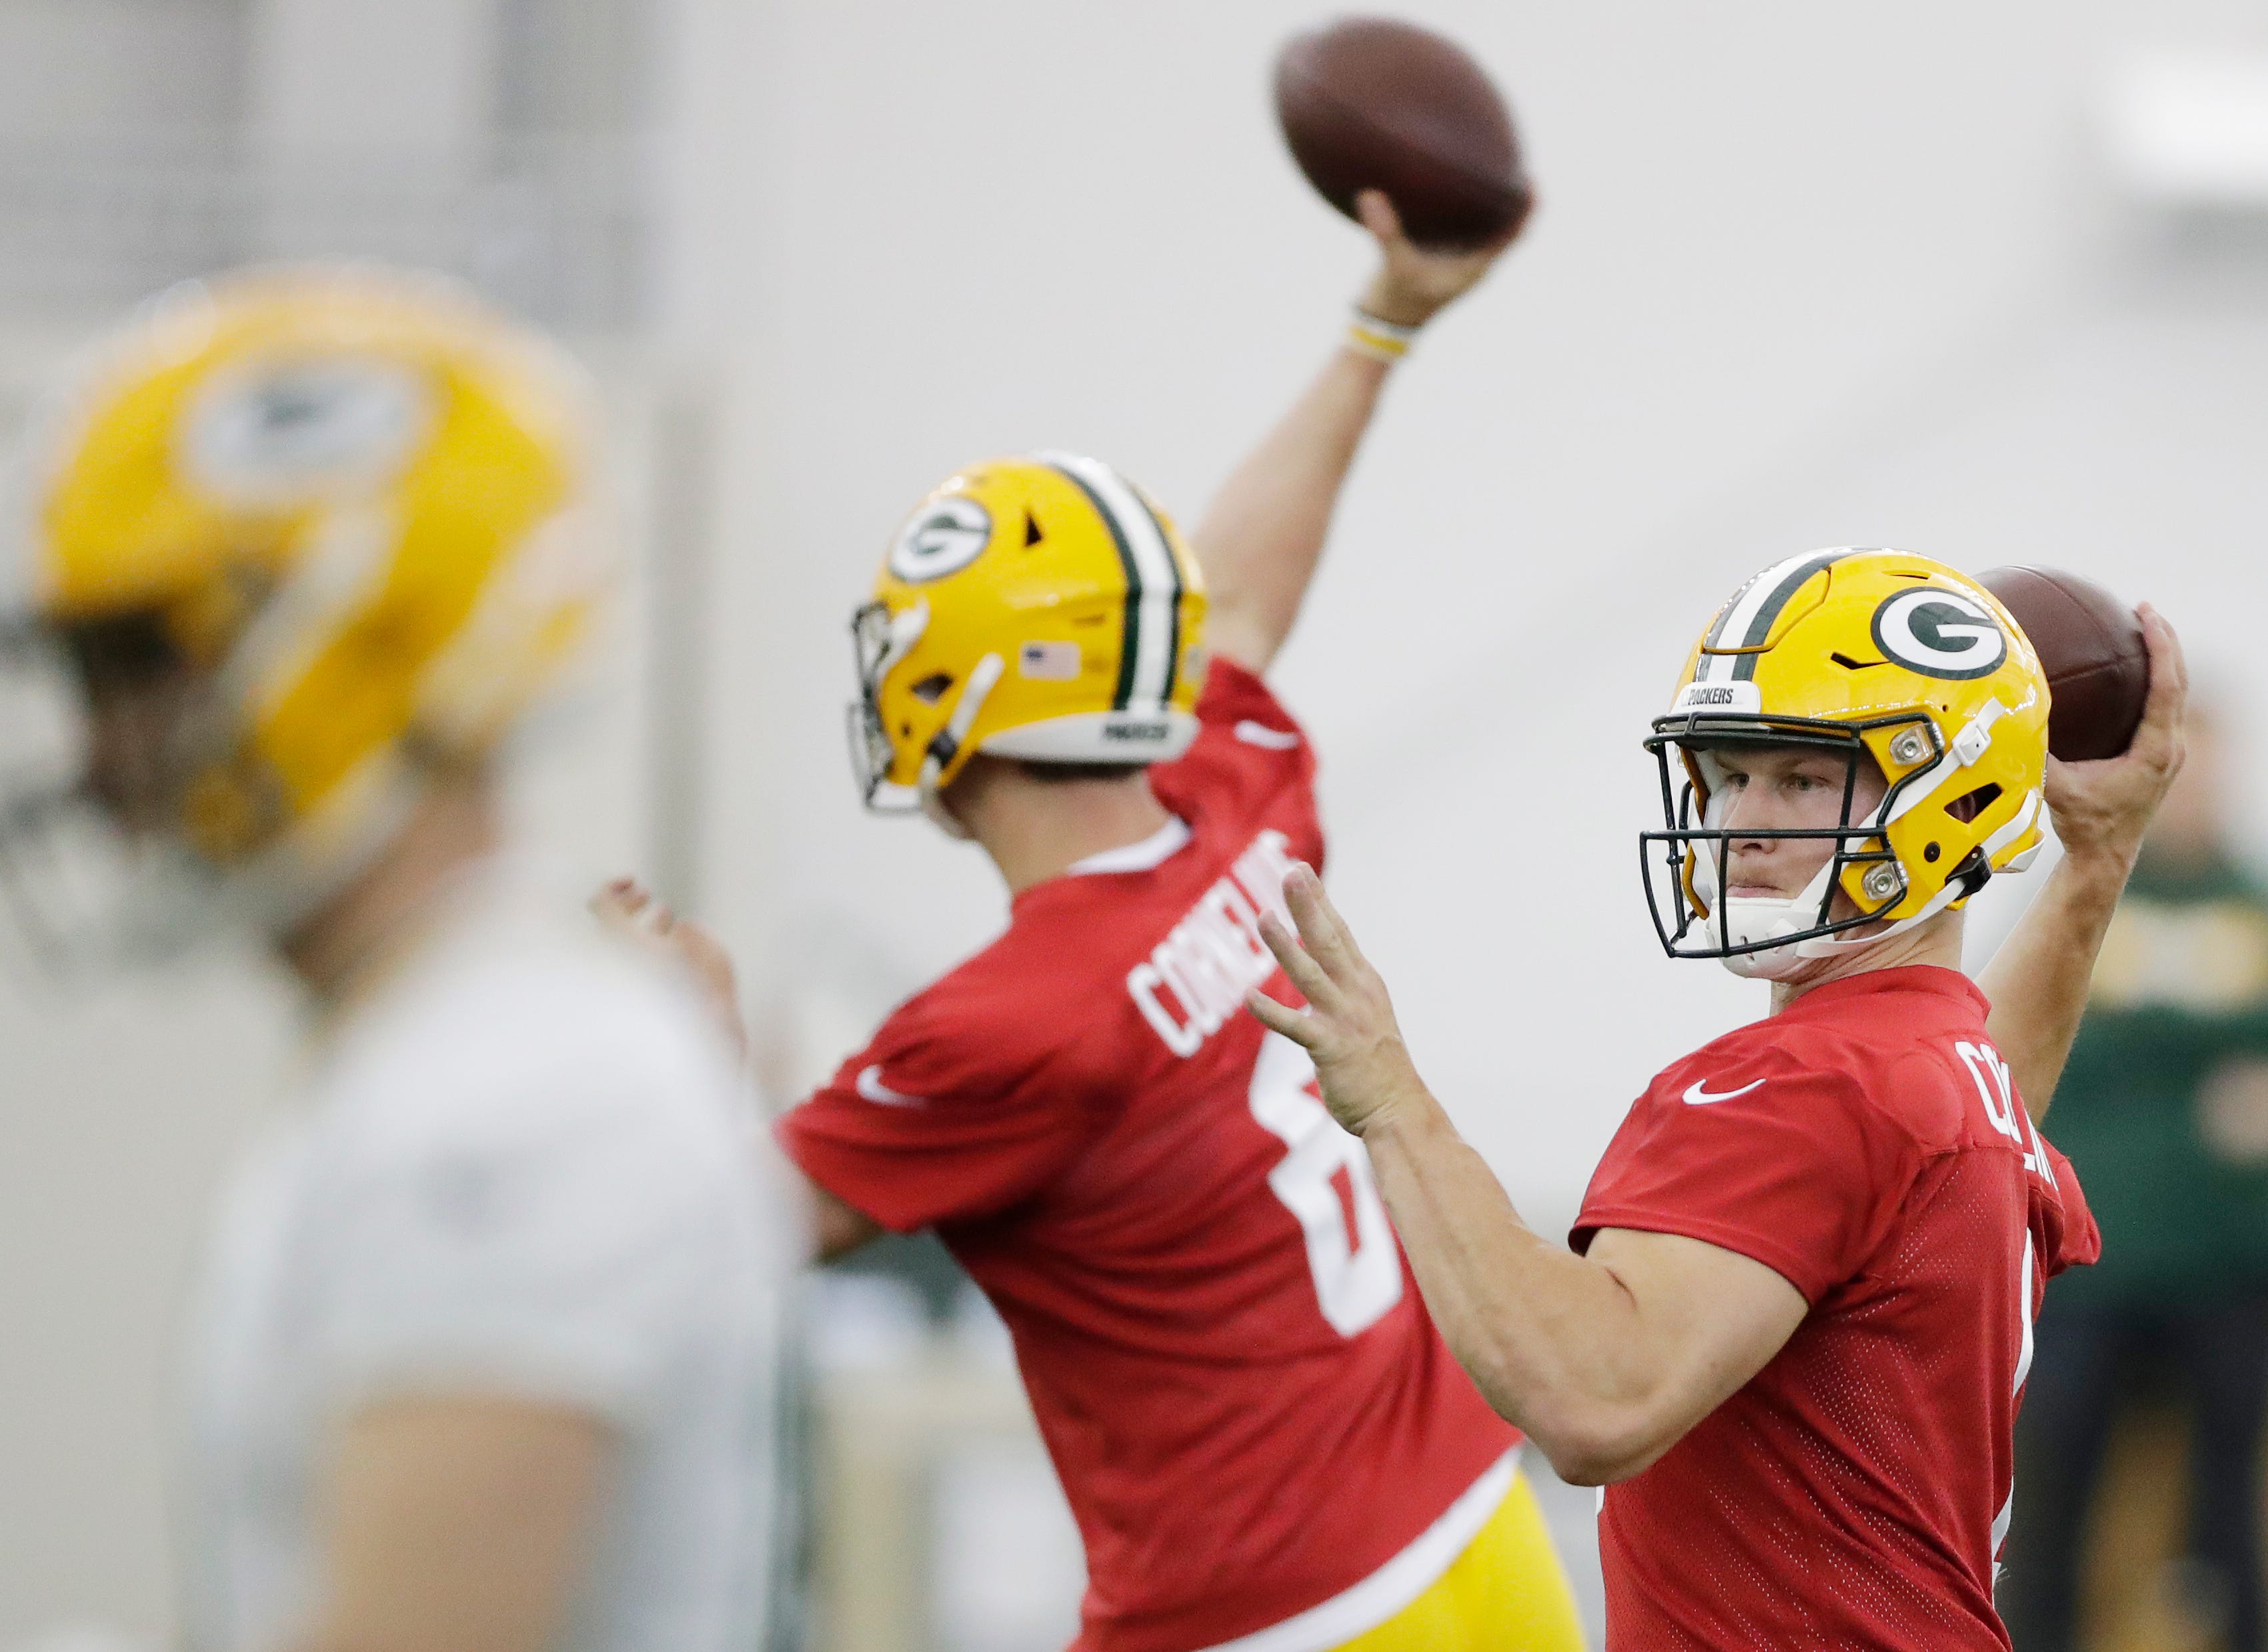 Green Bay Packers quarterback CJ Collins (1) during practice at rookie minicamp at the Don Hutson Center on Friday, May 3, 2019 in Ashwaubenon, Wis.
Adam Wesley/USA TODAY NETWORK-Wis